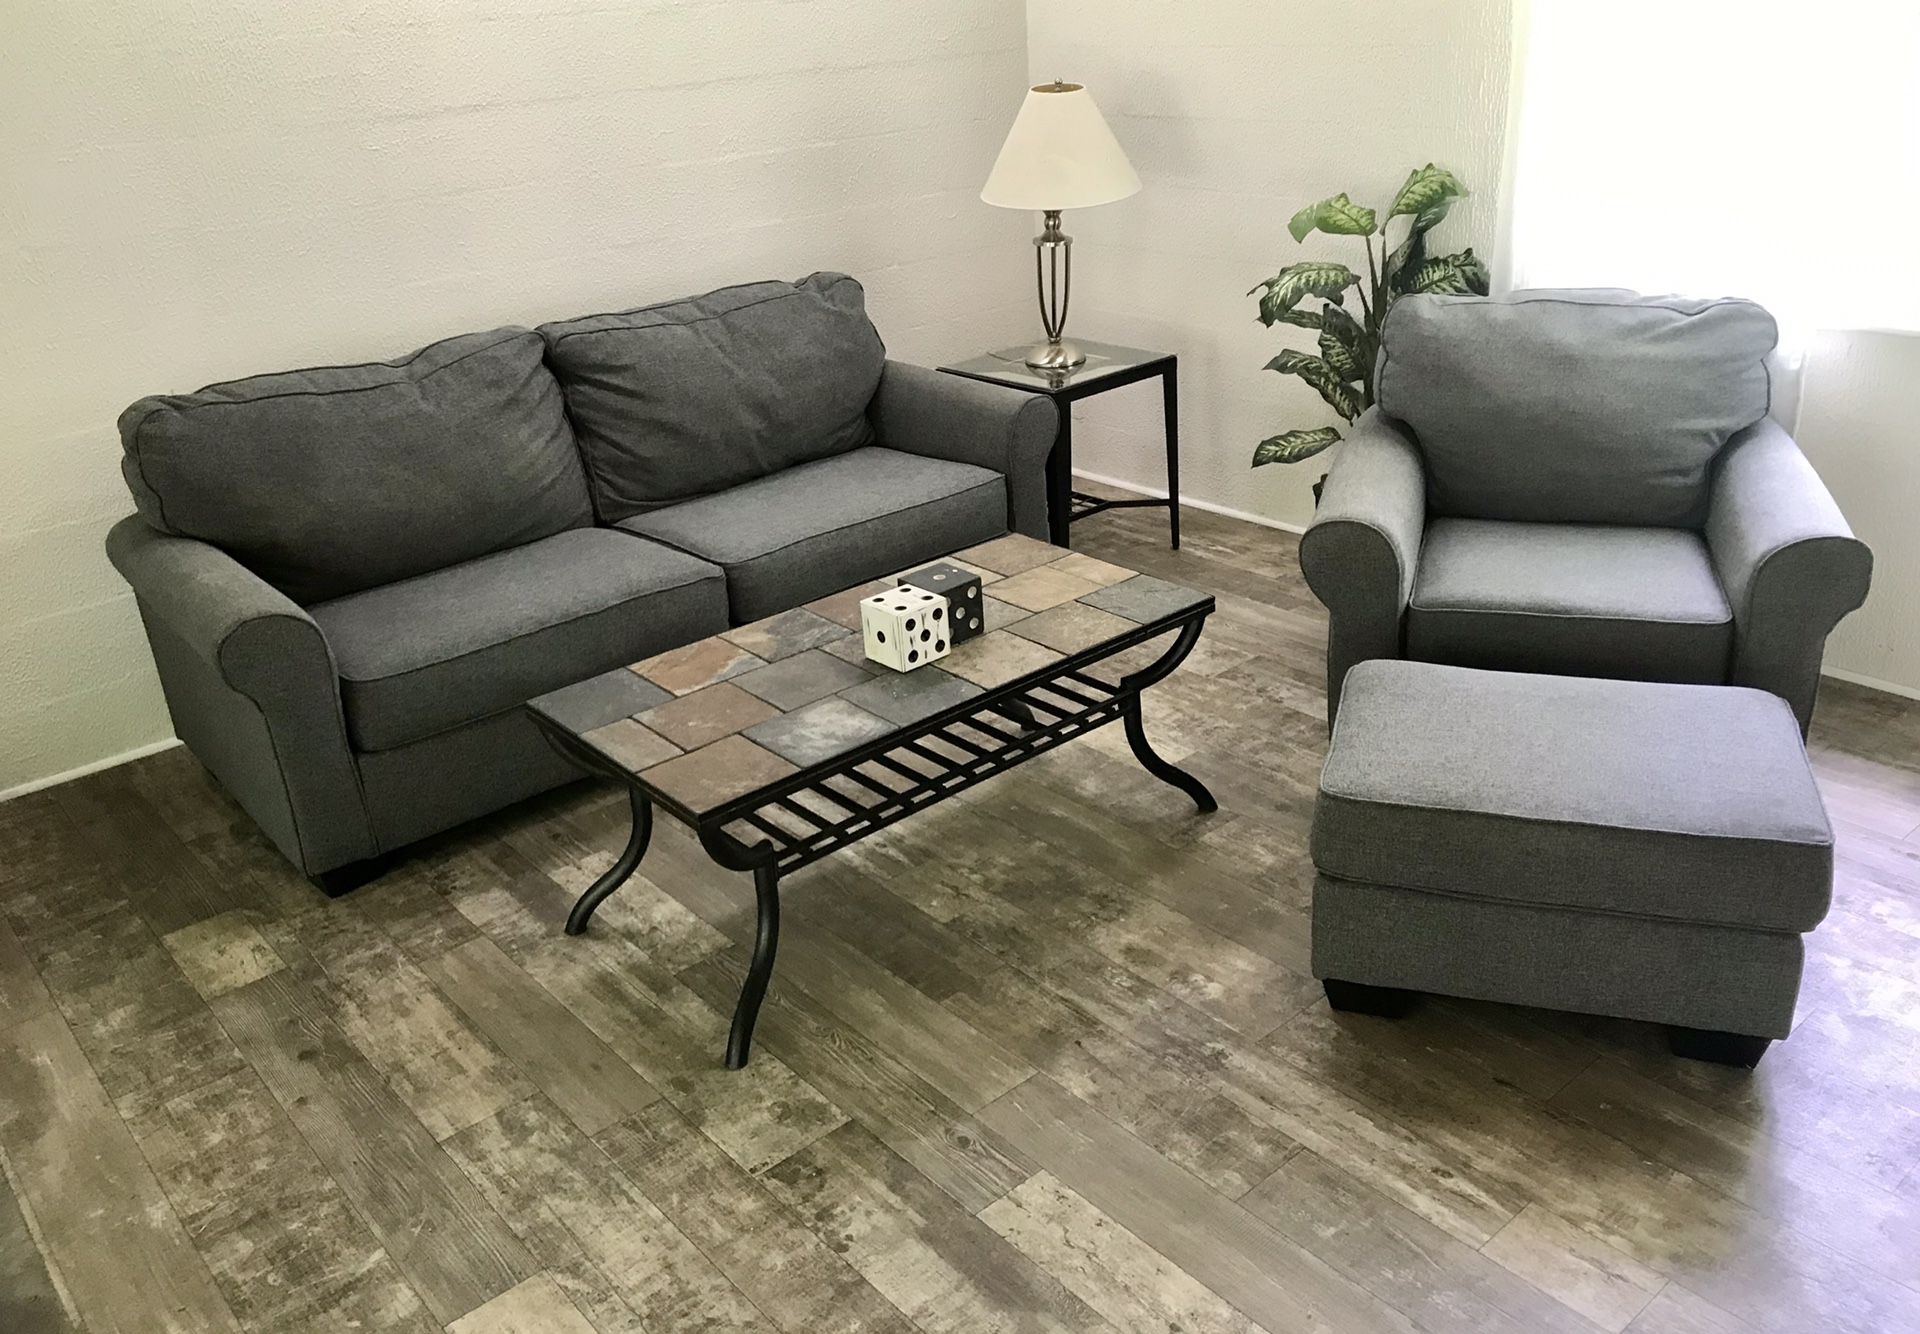 FREE DELIVERY Gray Ashley's Furniture Couch, Chair & Ottoman Set MINT CONDITION! (RETAILED @ $1400)